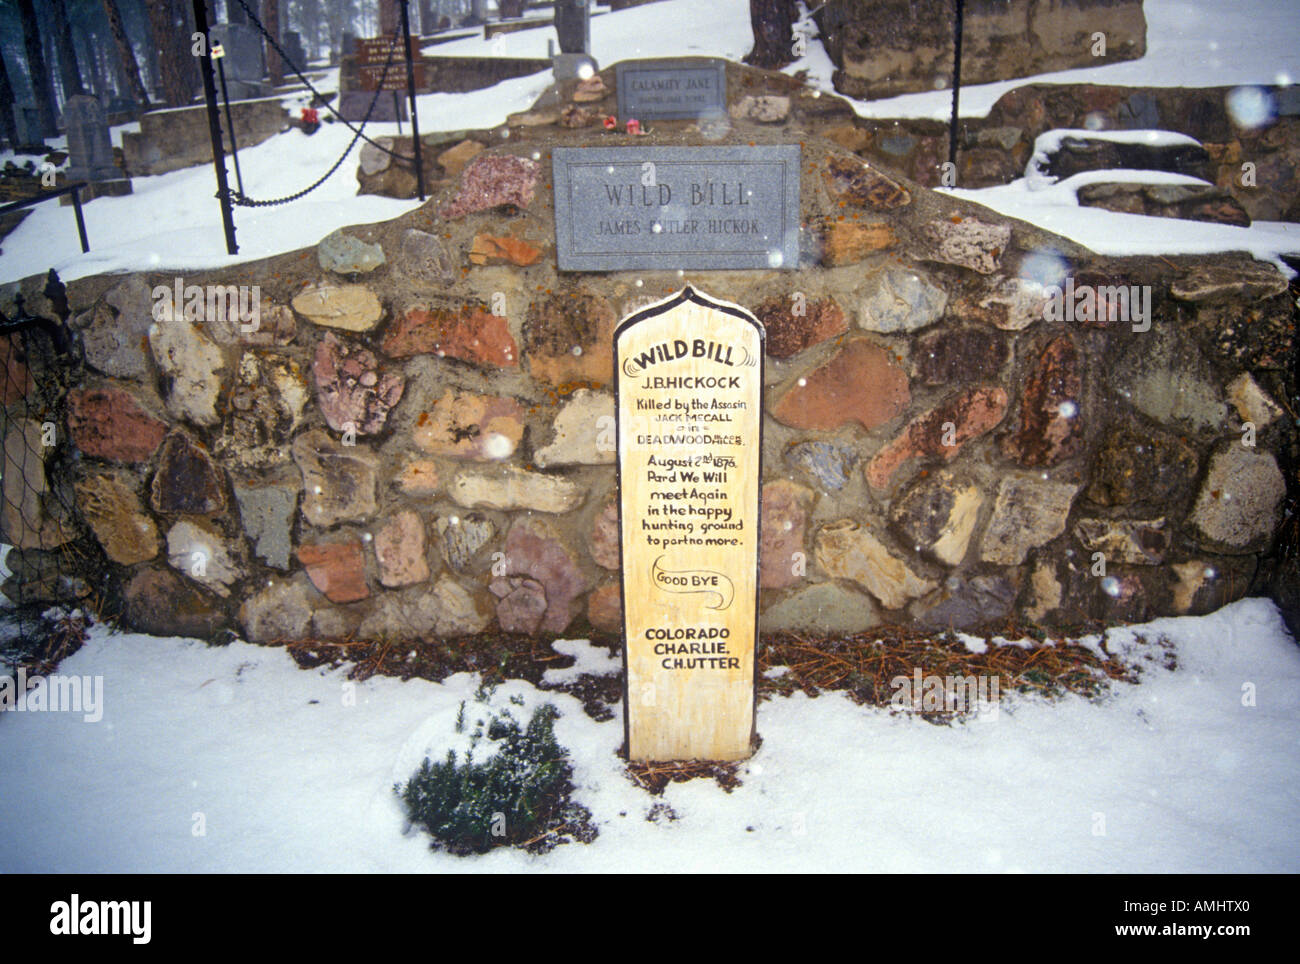 Grave site of Wild Bill Hickock infamous outlaw in Mount Moriah Cemetery Deadwood SD in winter snow Stock Photo